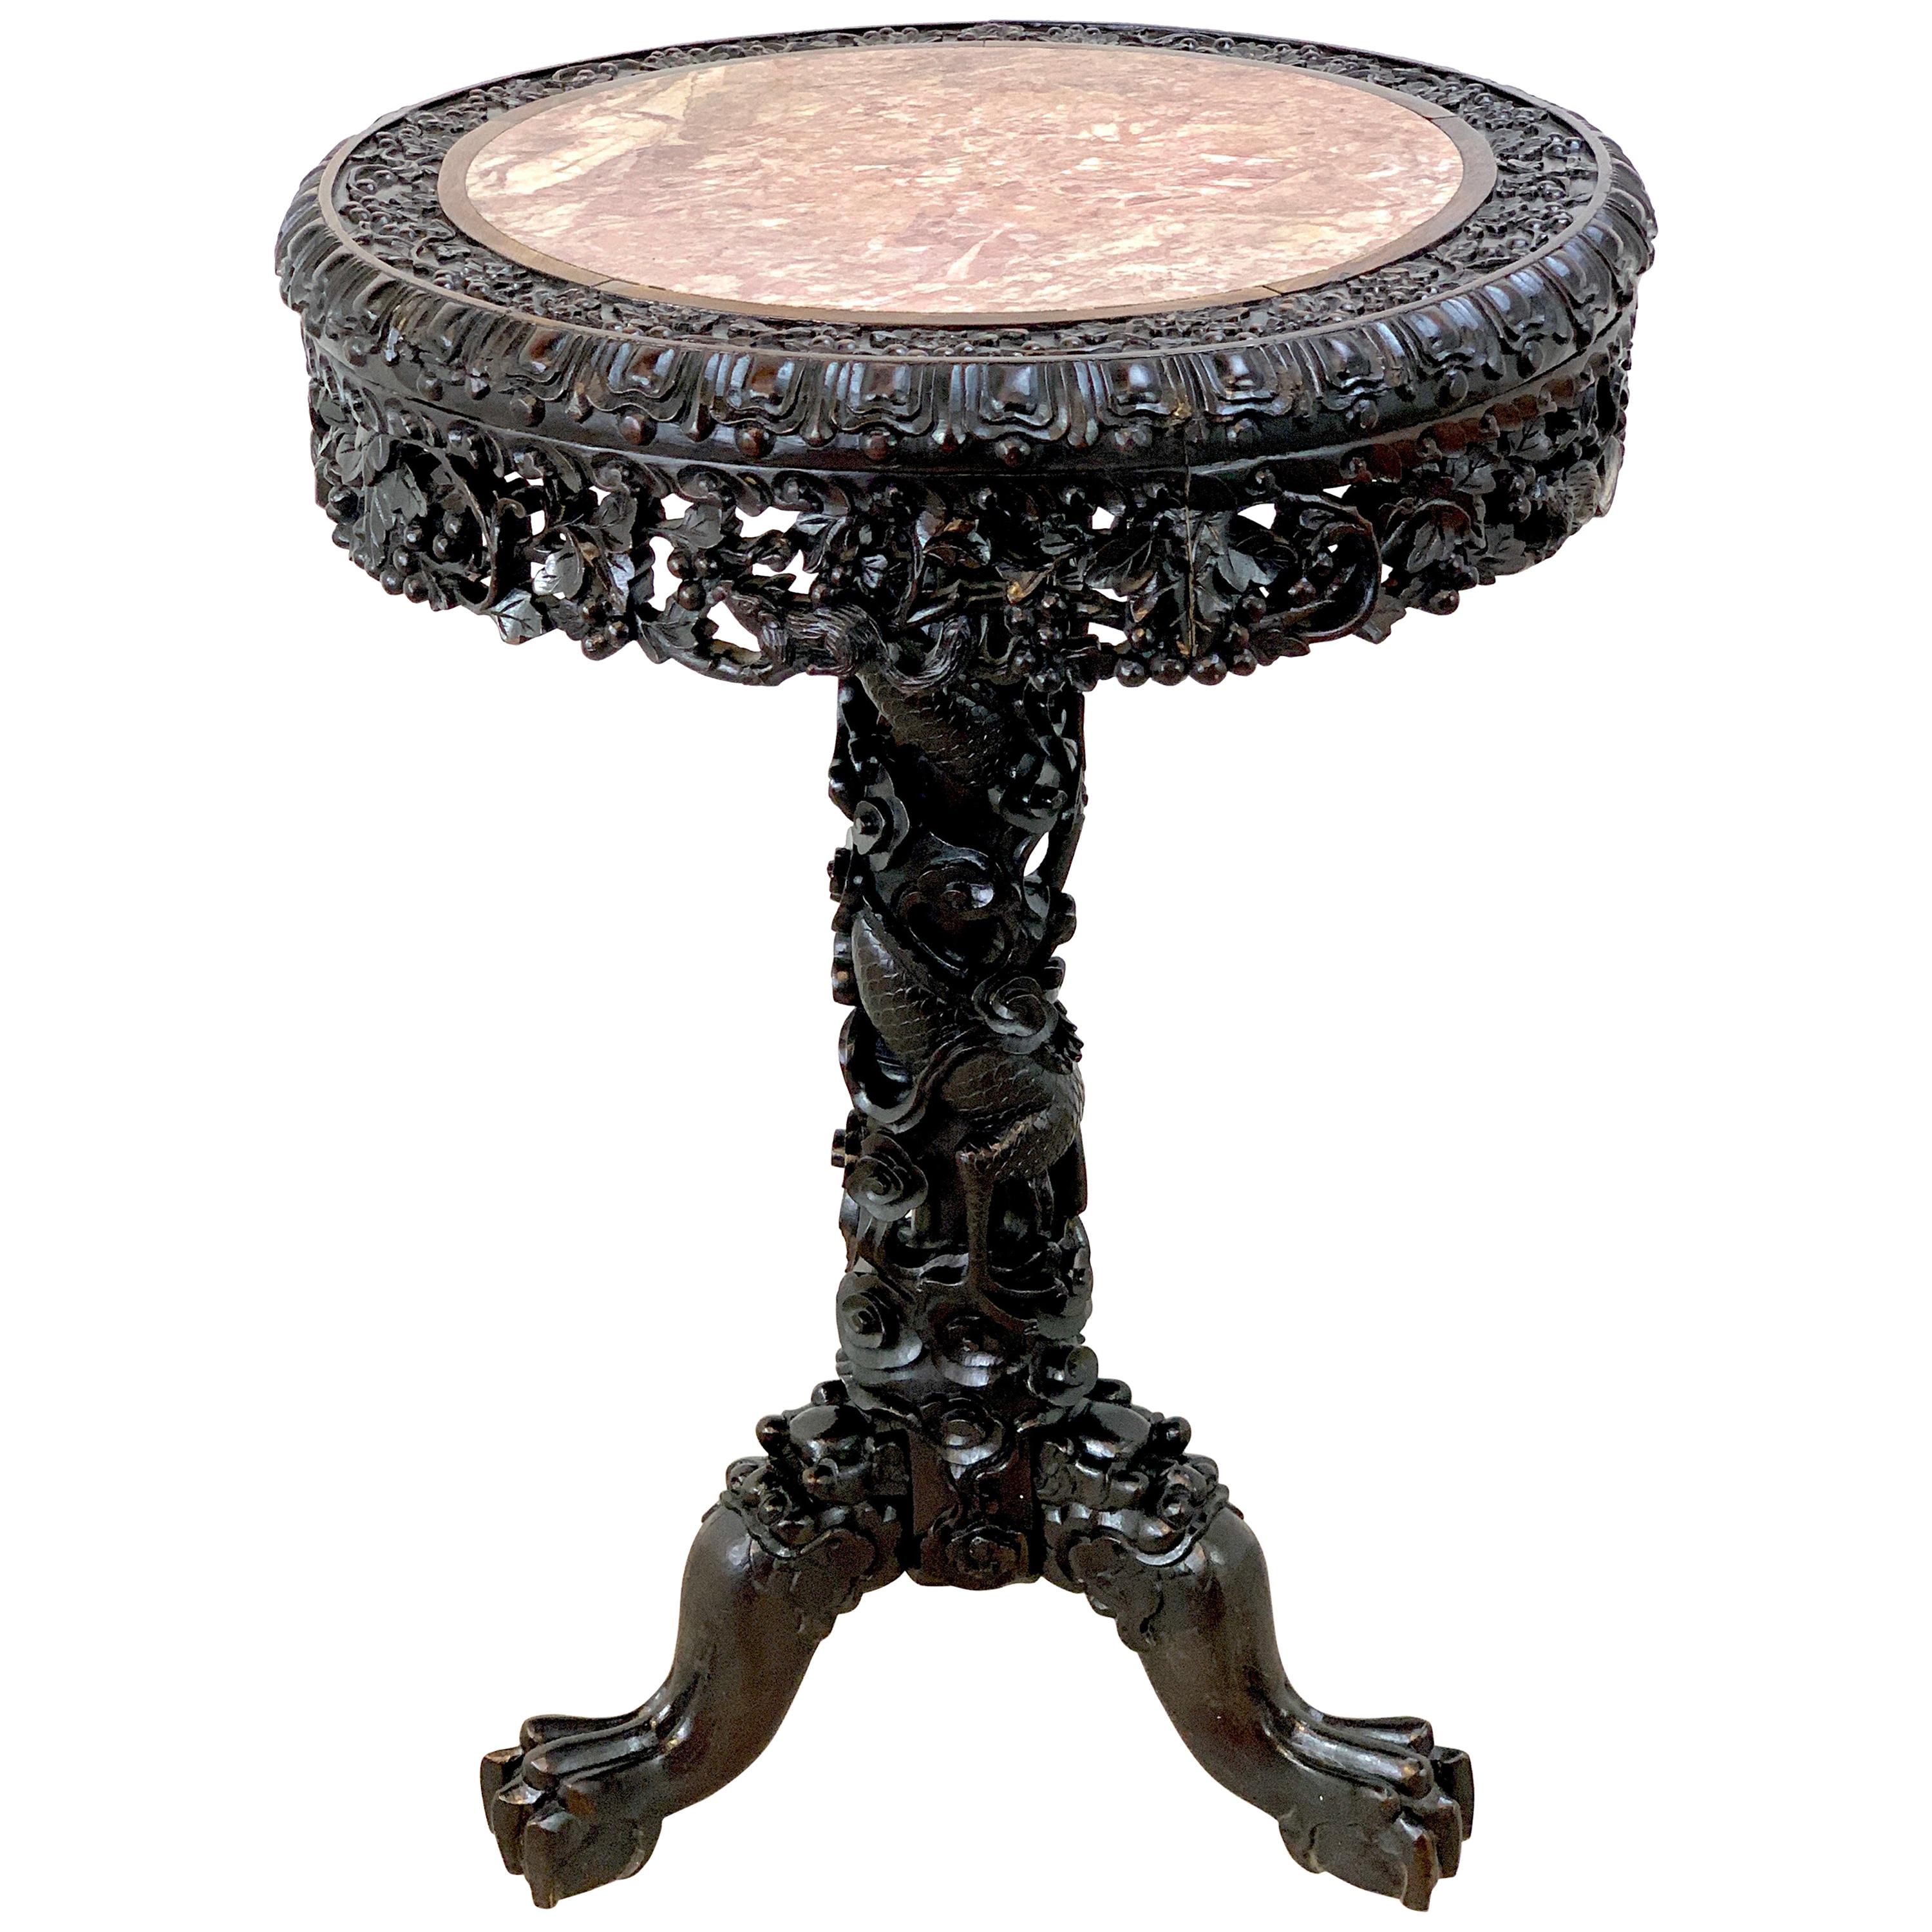 Exquisite 19th Century Chinese Export Carved Hardwood and Marble Table